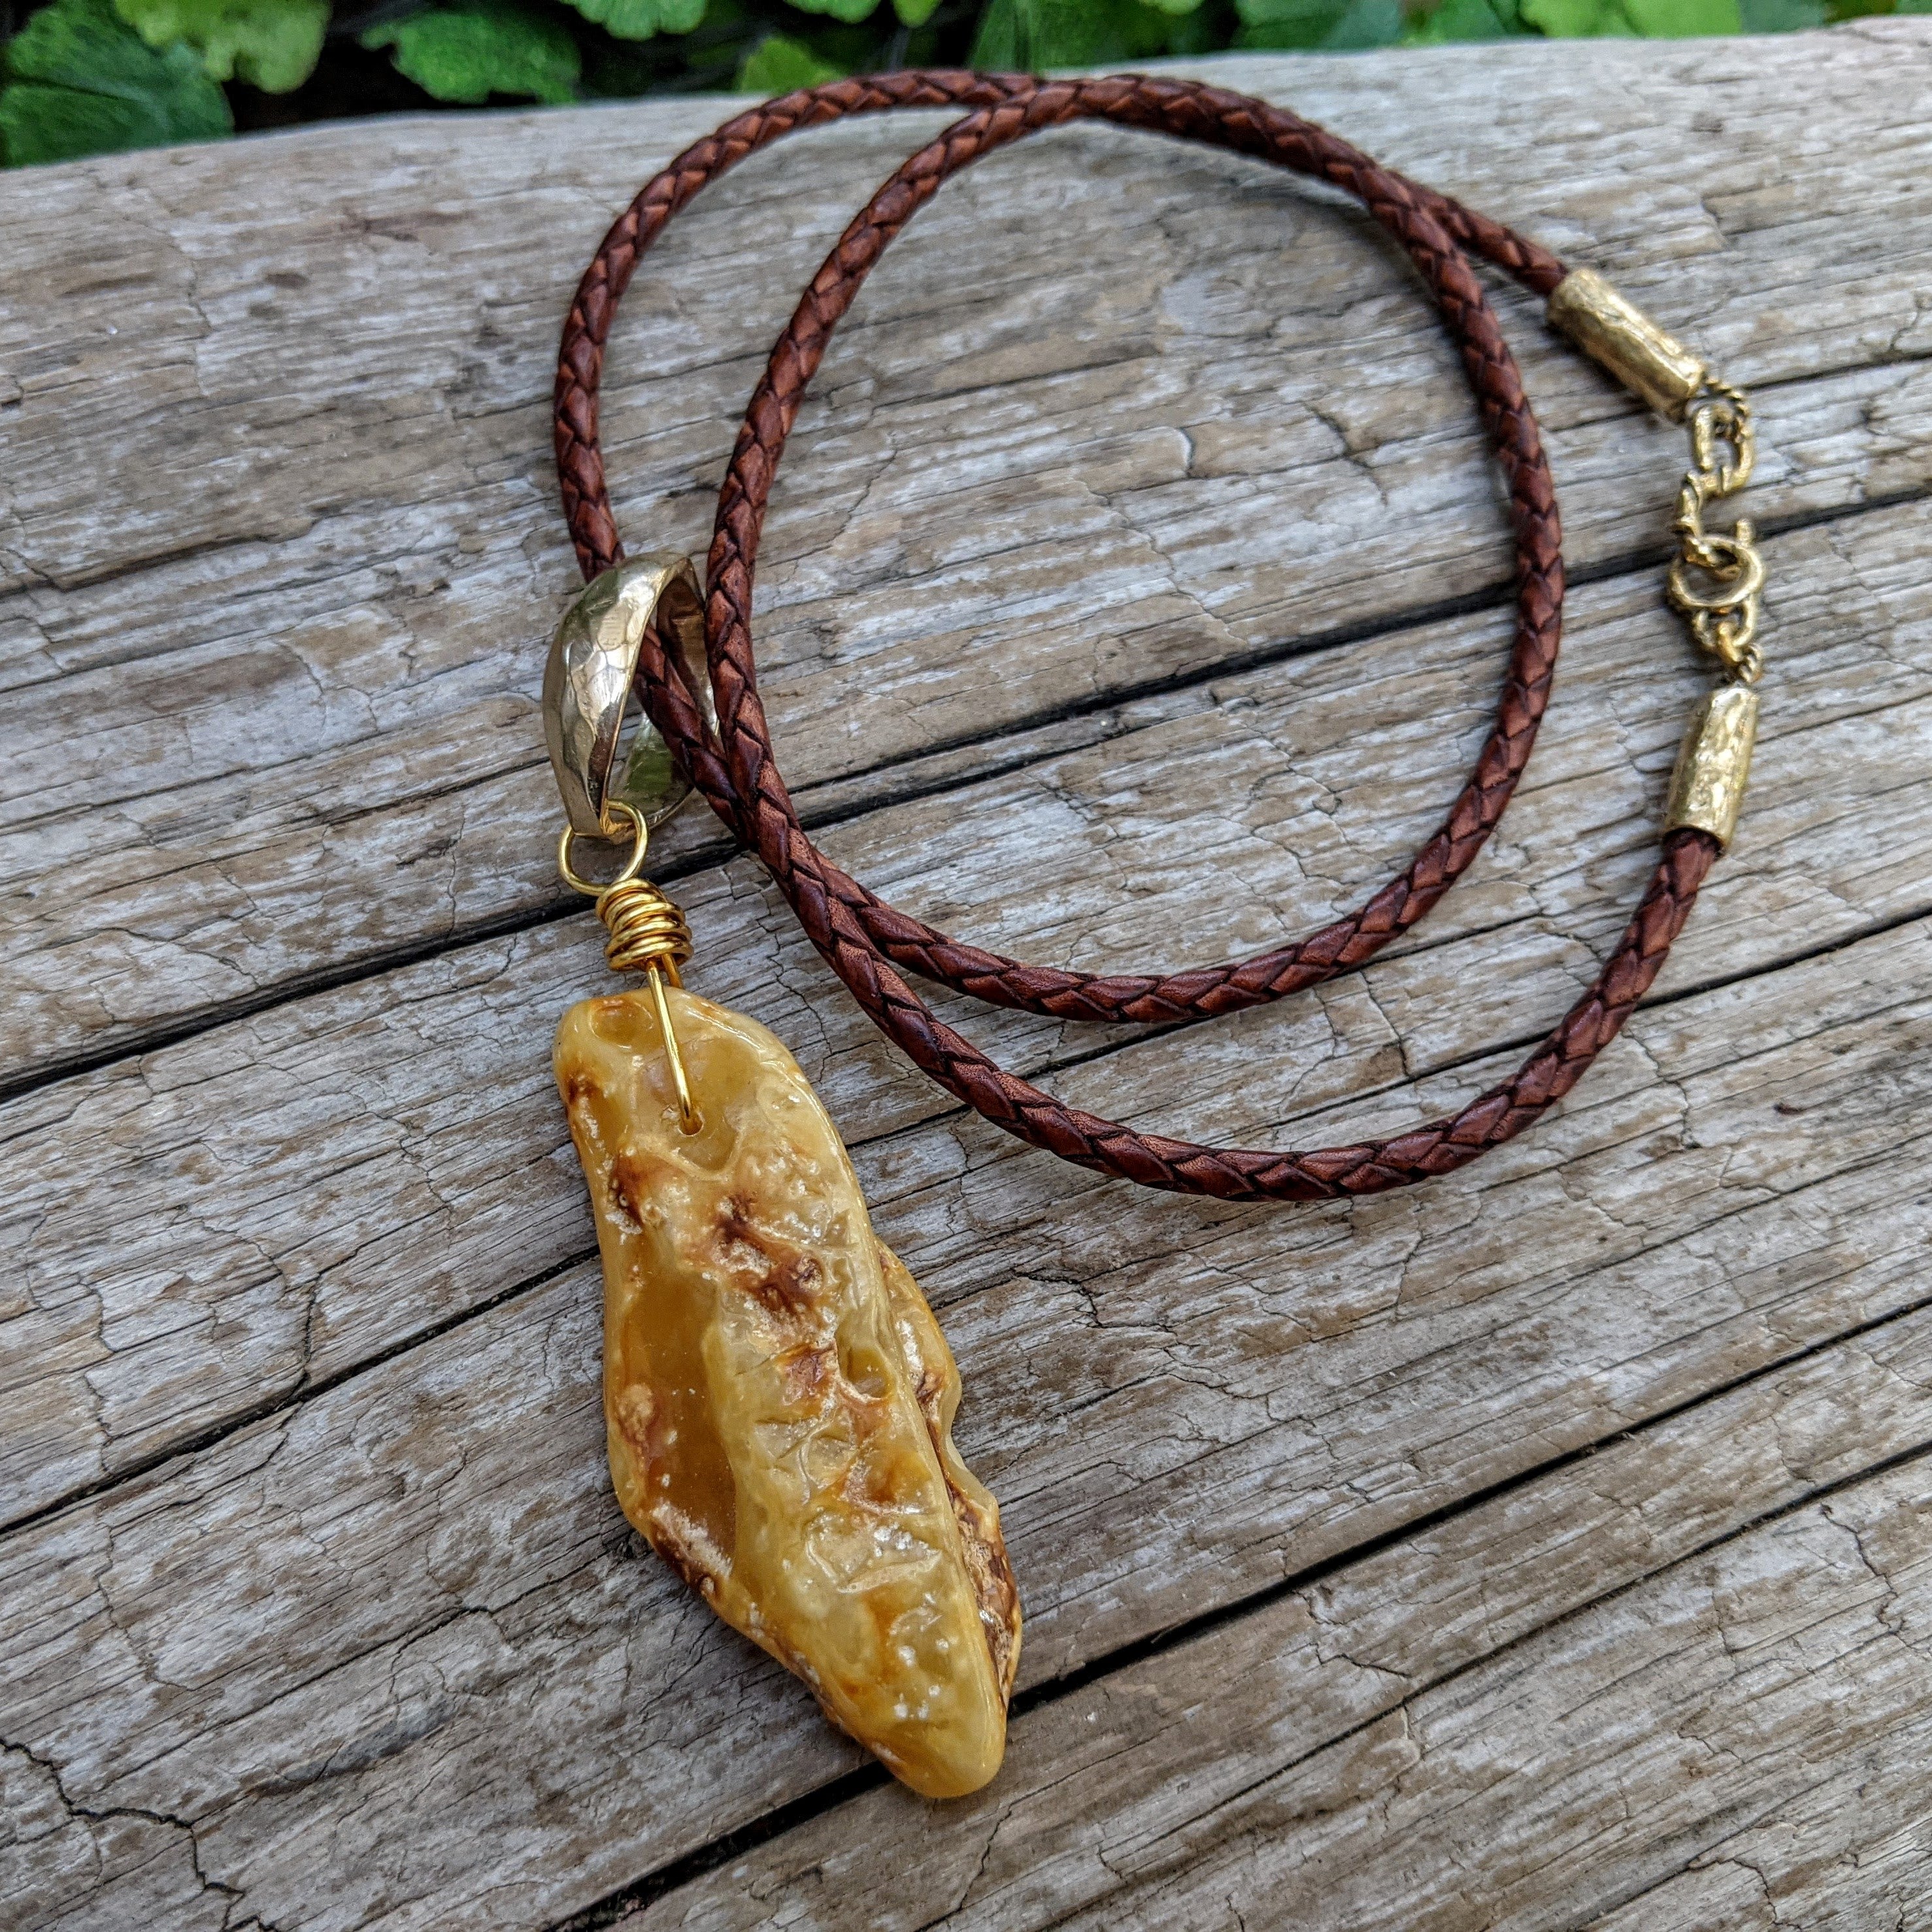 Big rough Amber Pendant necklace. Egg yolk amber necklace. Boho Bohemian jewelry. Artistic jewelry. Handcrafted by Aurora Creative Jewellery.